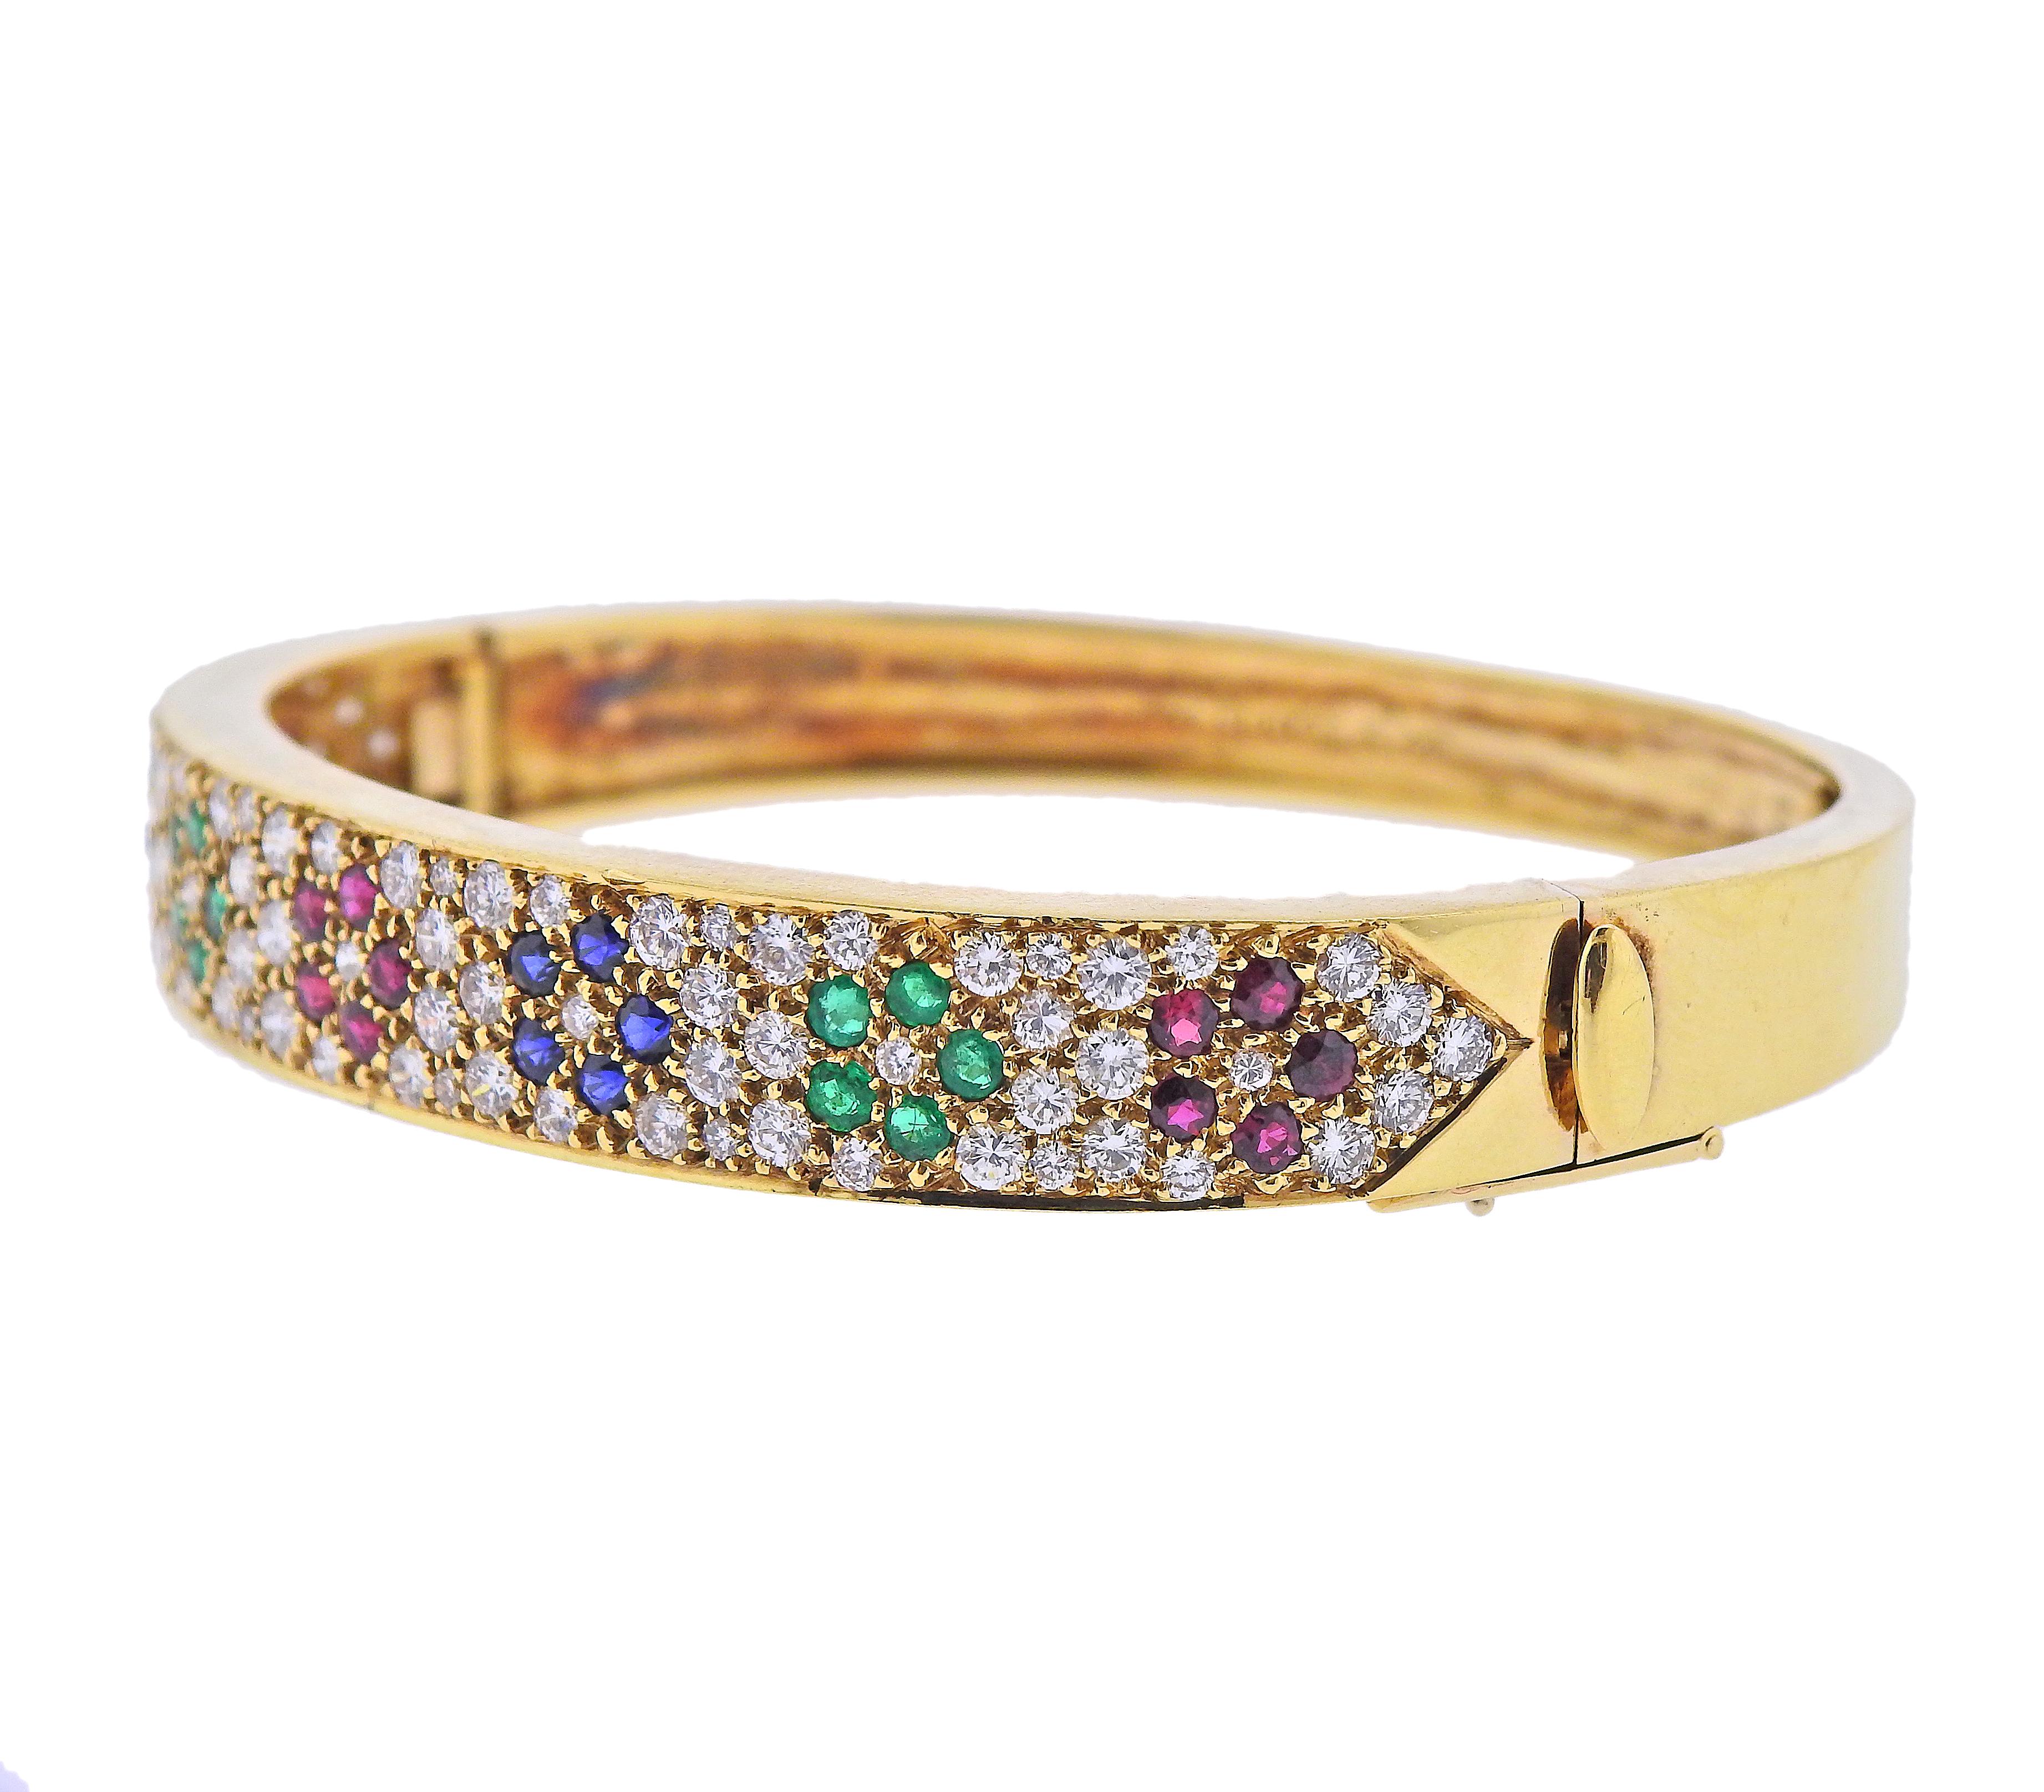 18k yellow gold bangle bracelet by Van Cleef & Arpels, featuring flowers, set in rubies, emeralds, sapphires and surrounded with approx. 2.40ctw in diamonds. Bracelet will fit approx. 7